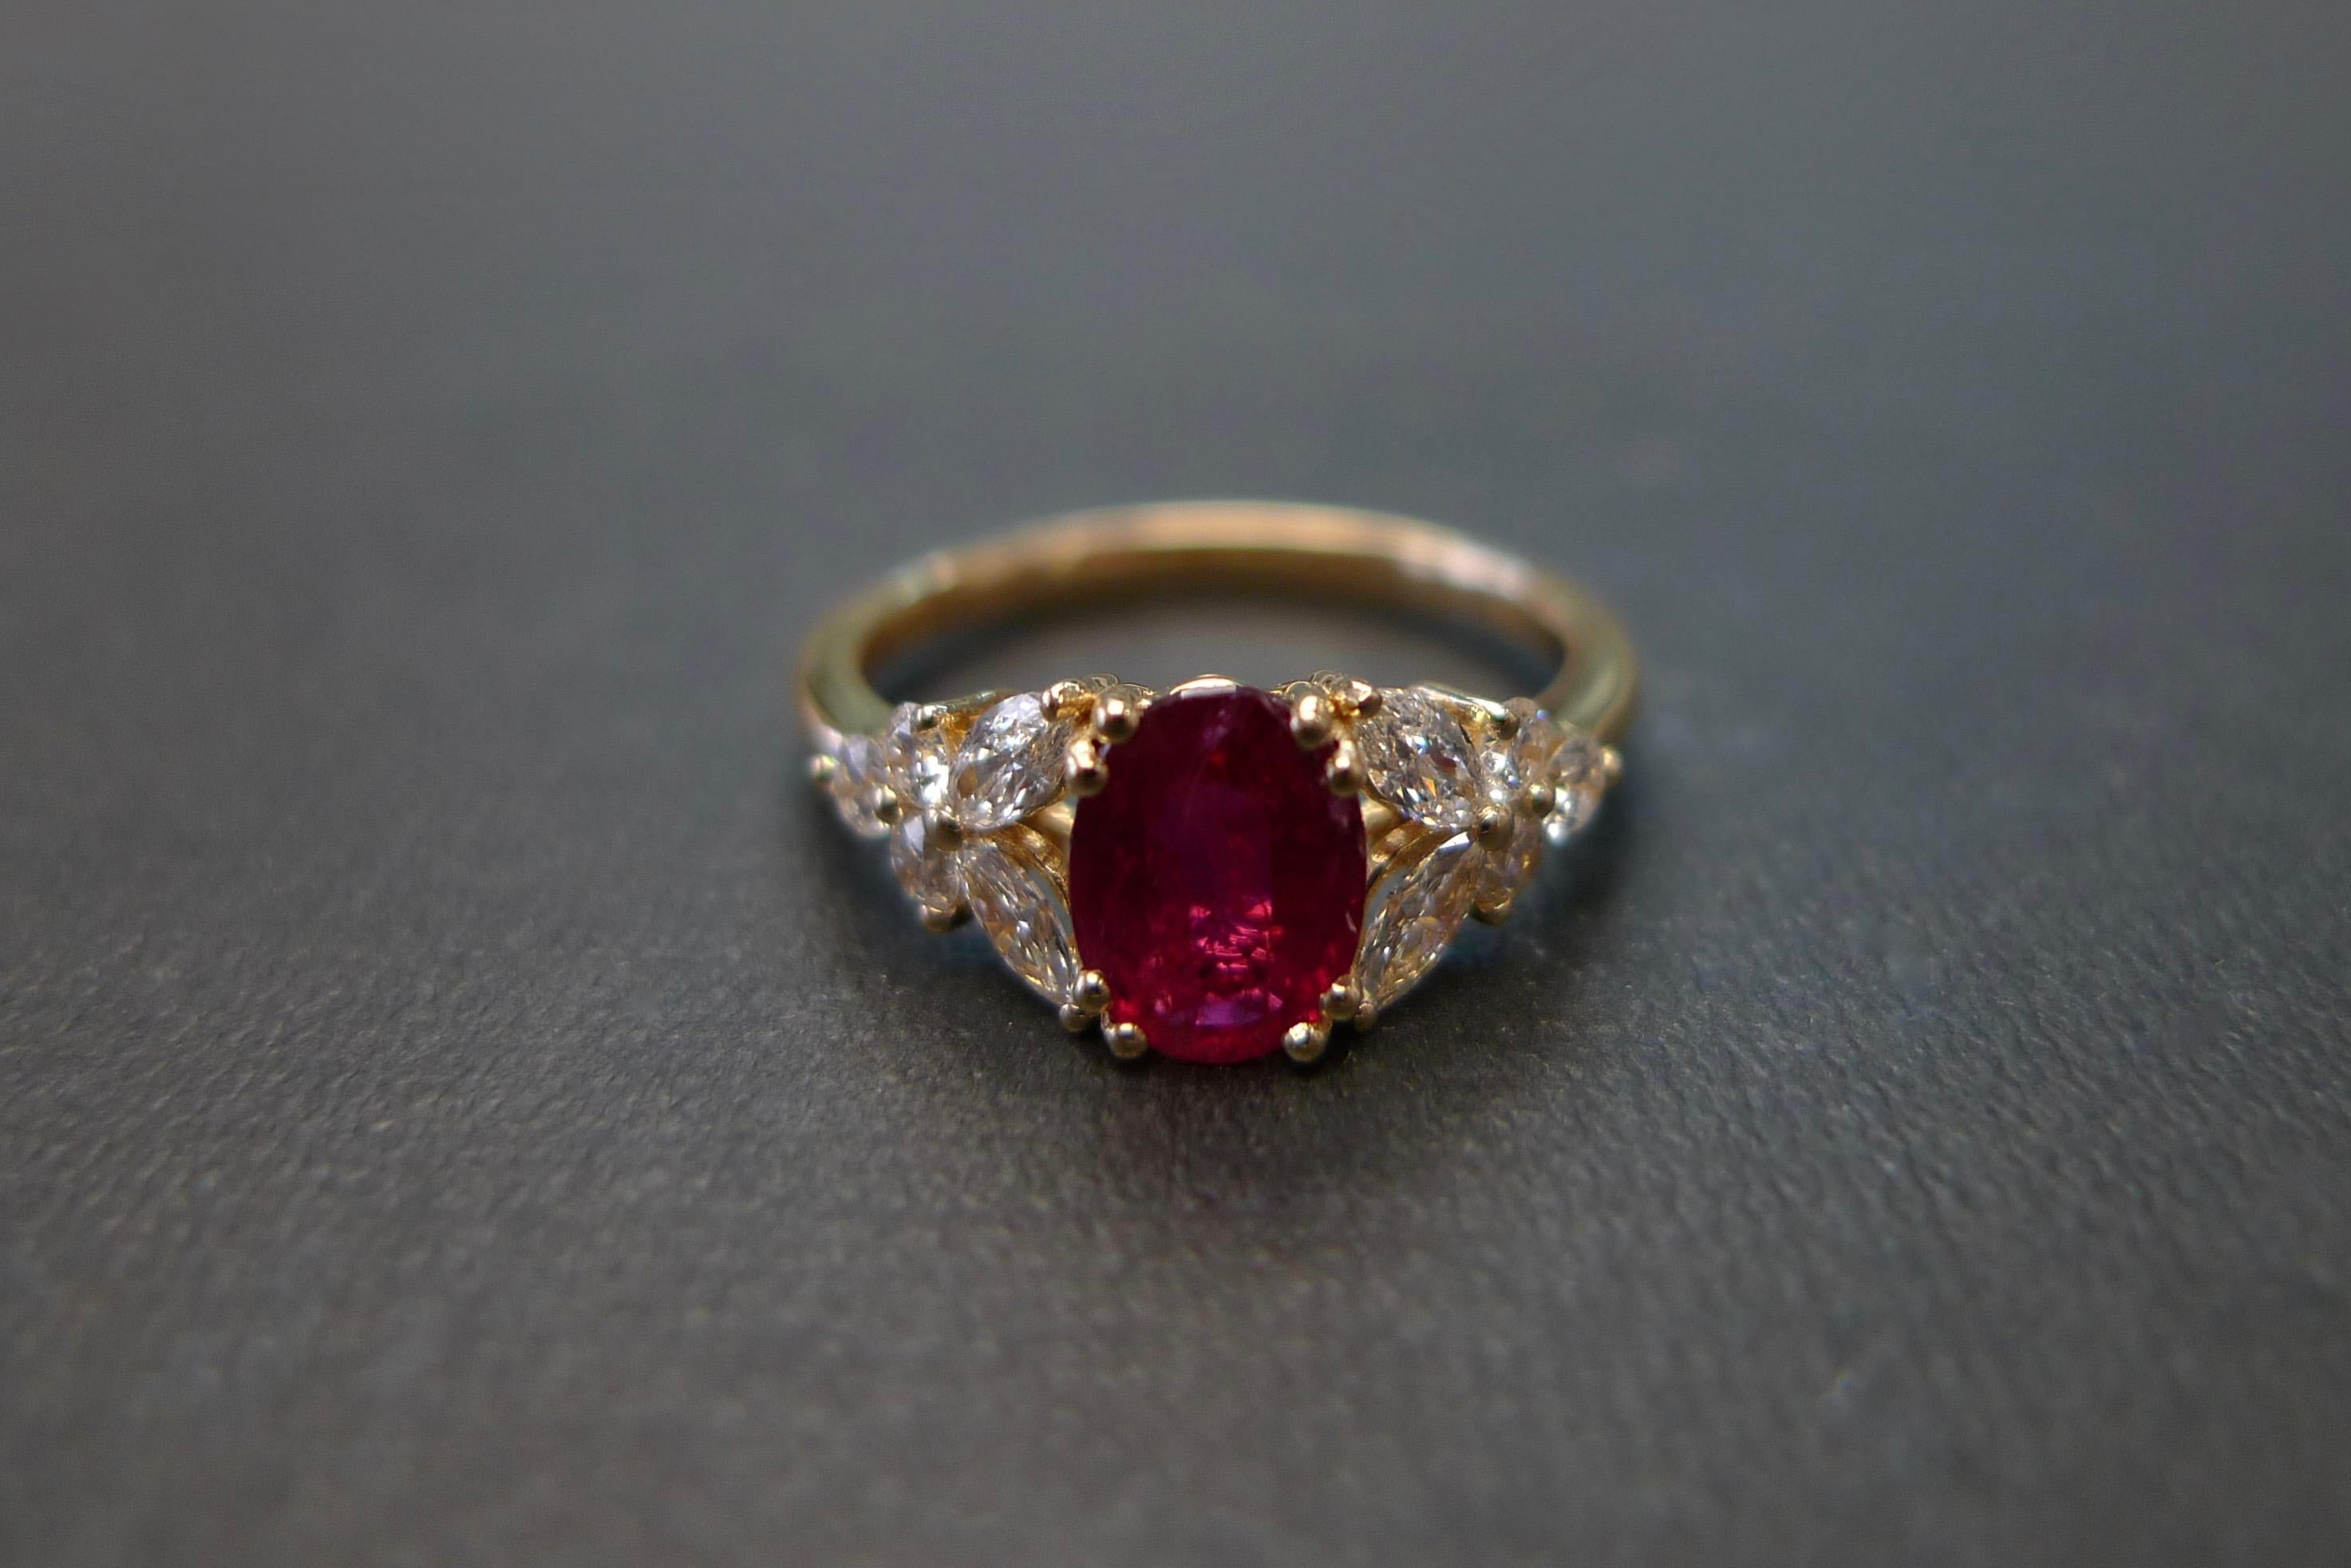 For Sale:  Natural Genuine Ruby and Marquise Diamonds Ring Made in 14k Yellow Gold  11